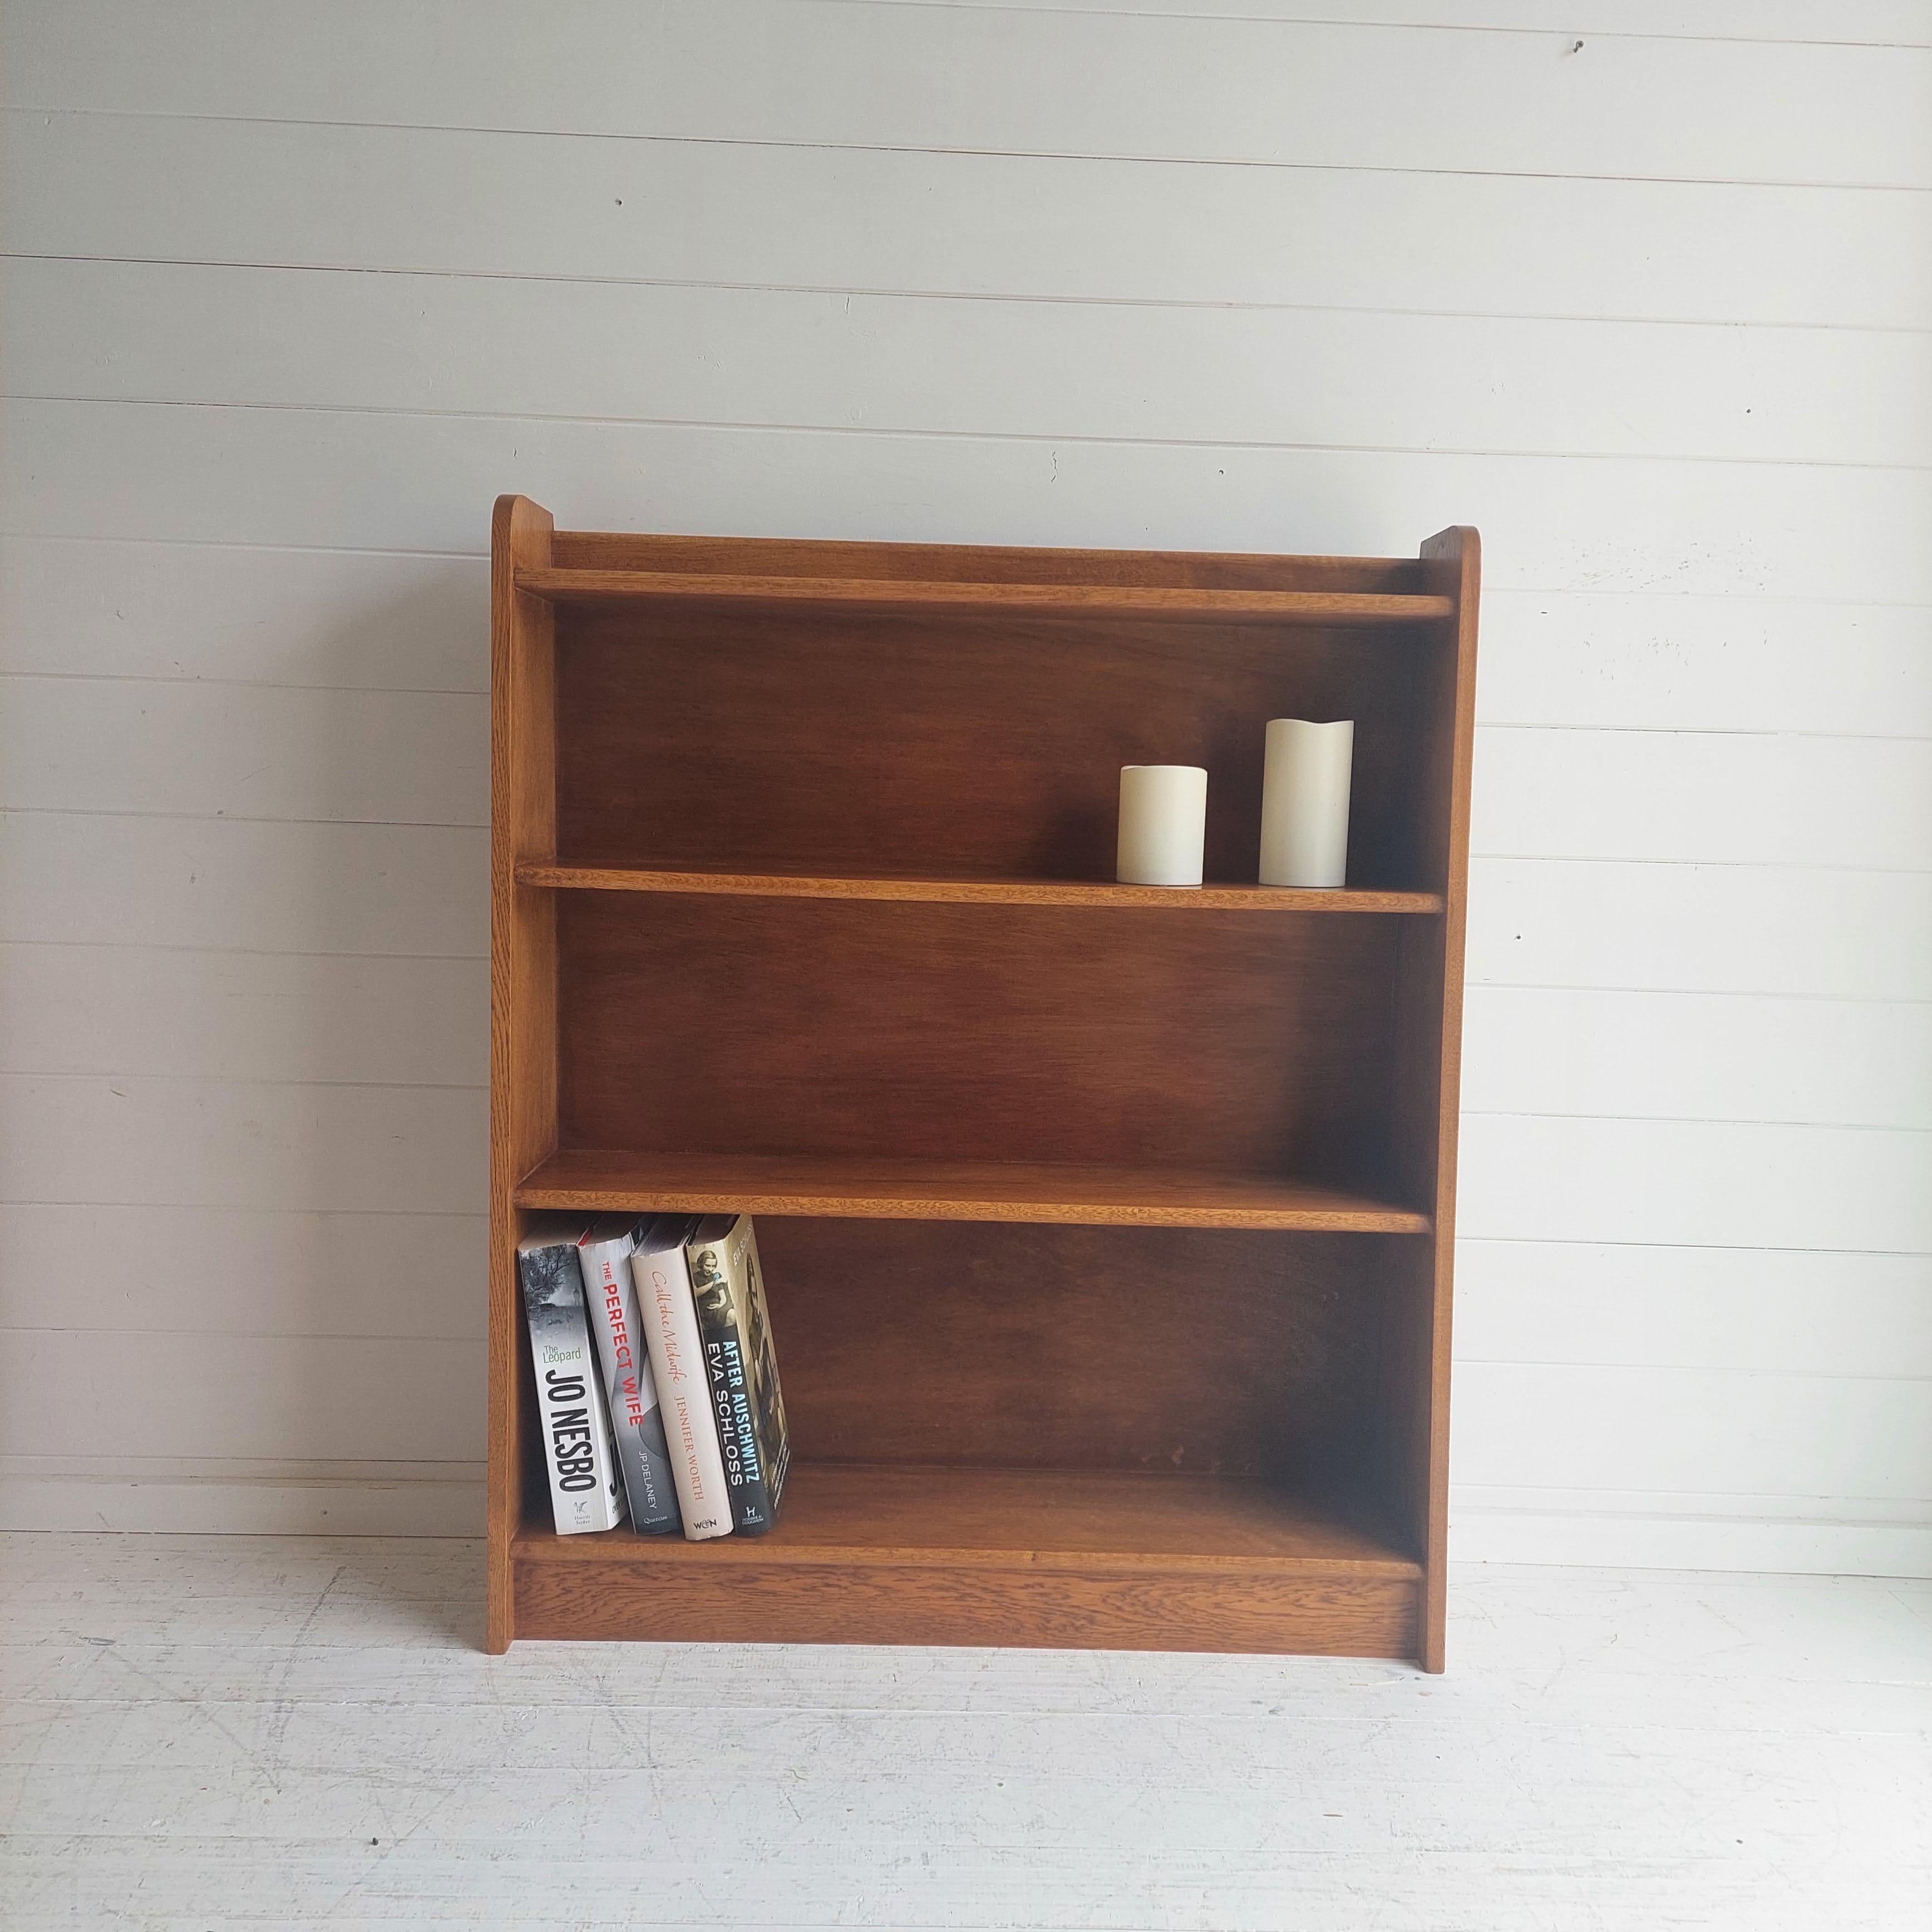 Minimalist Vintage wooden bookcase.
Dating from the Late Art Deco period eraly Mid century period.
Most ptobably 50s.
This vintage mid-century modern bookcase is crafted out of oak wood and has been professionally restored by our team of in-house